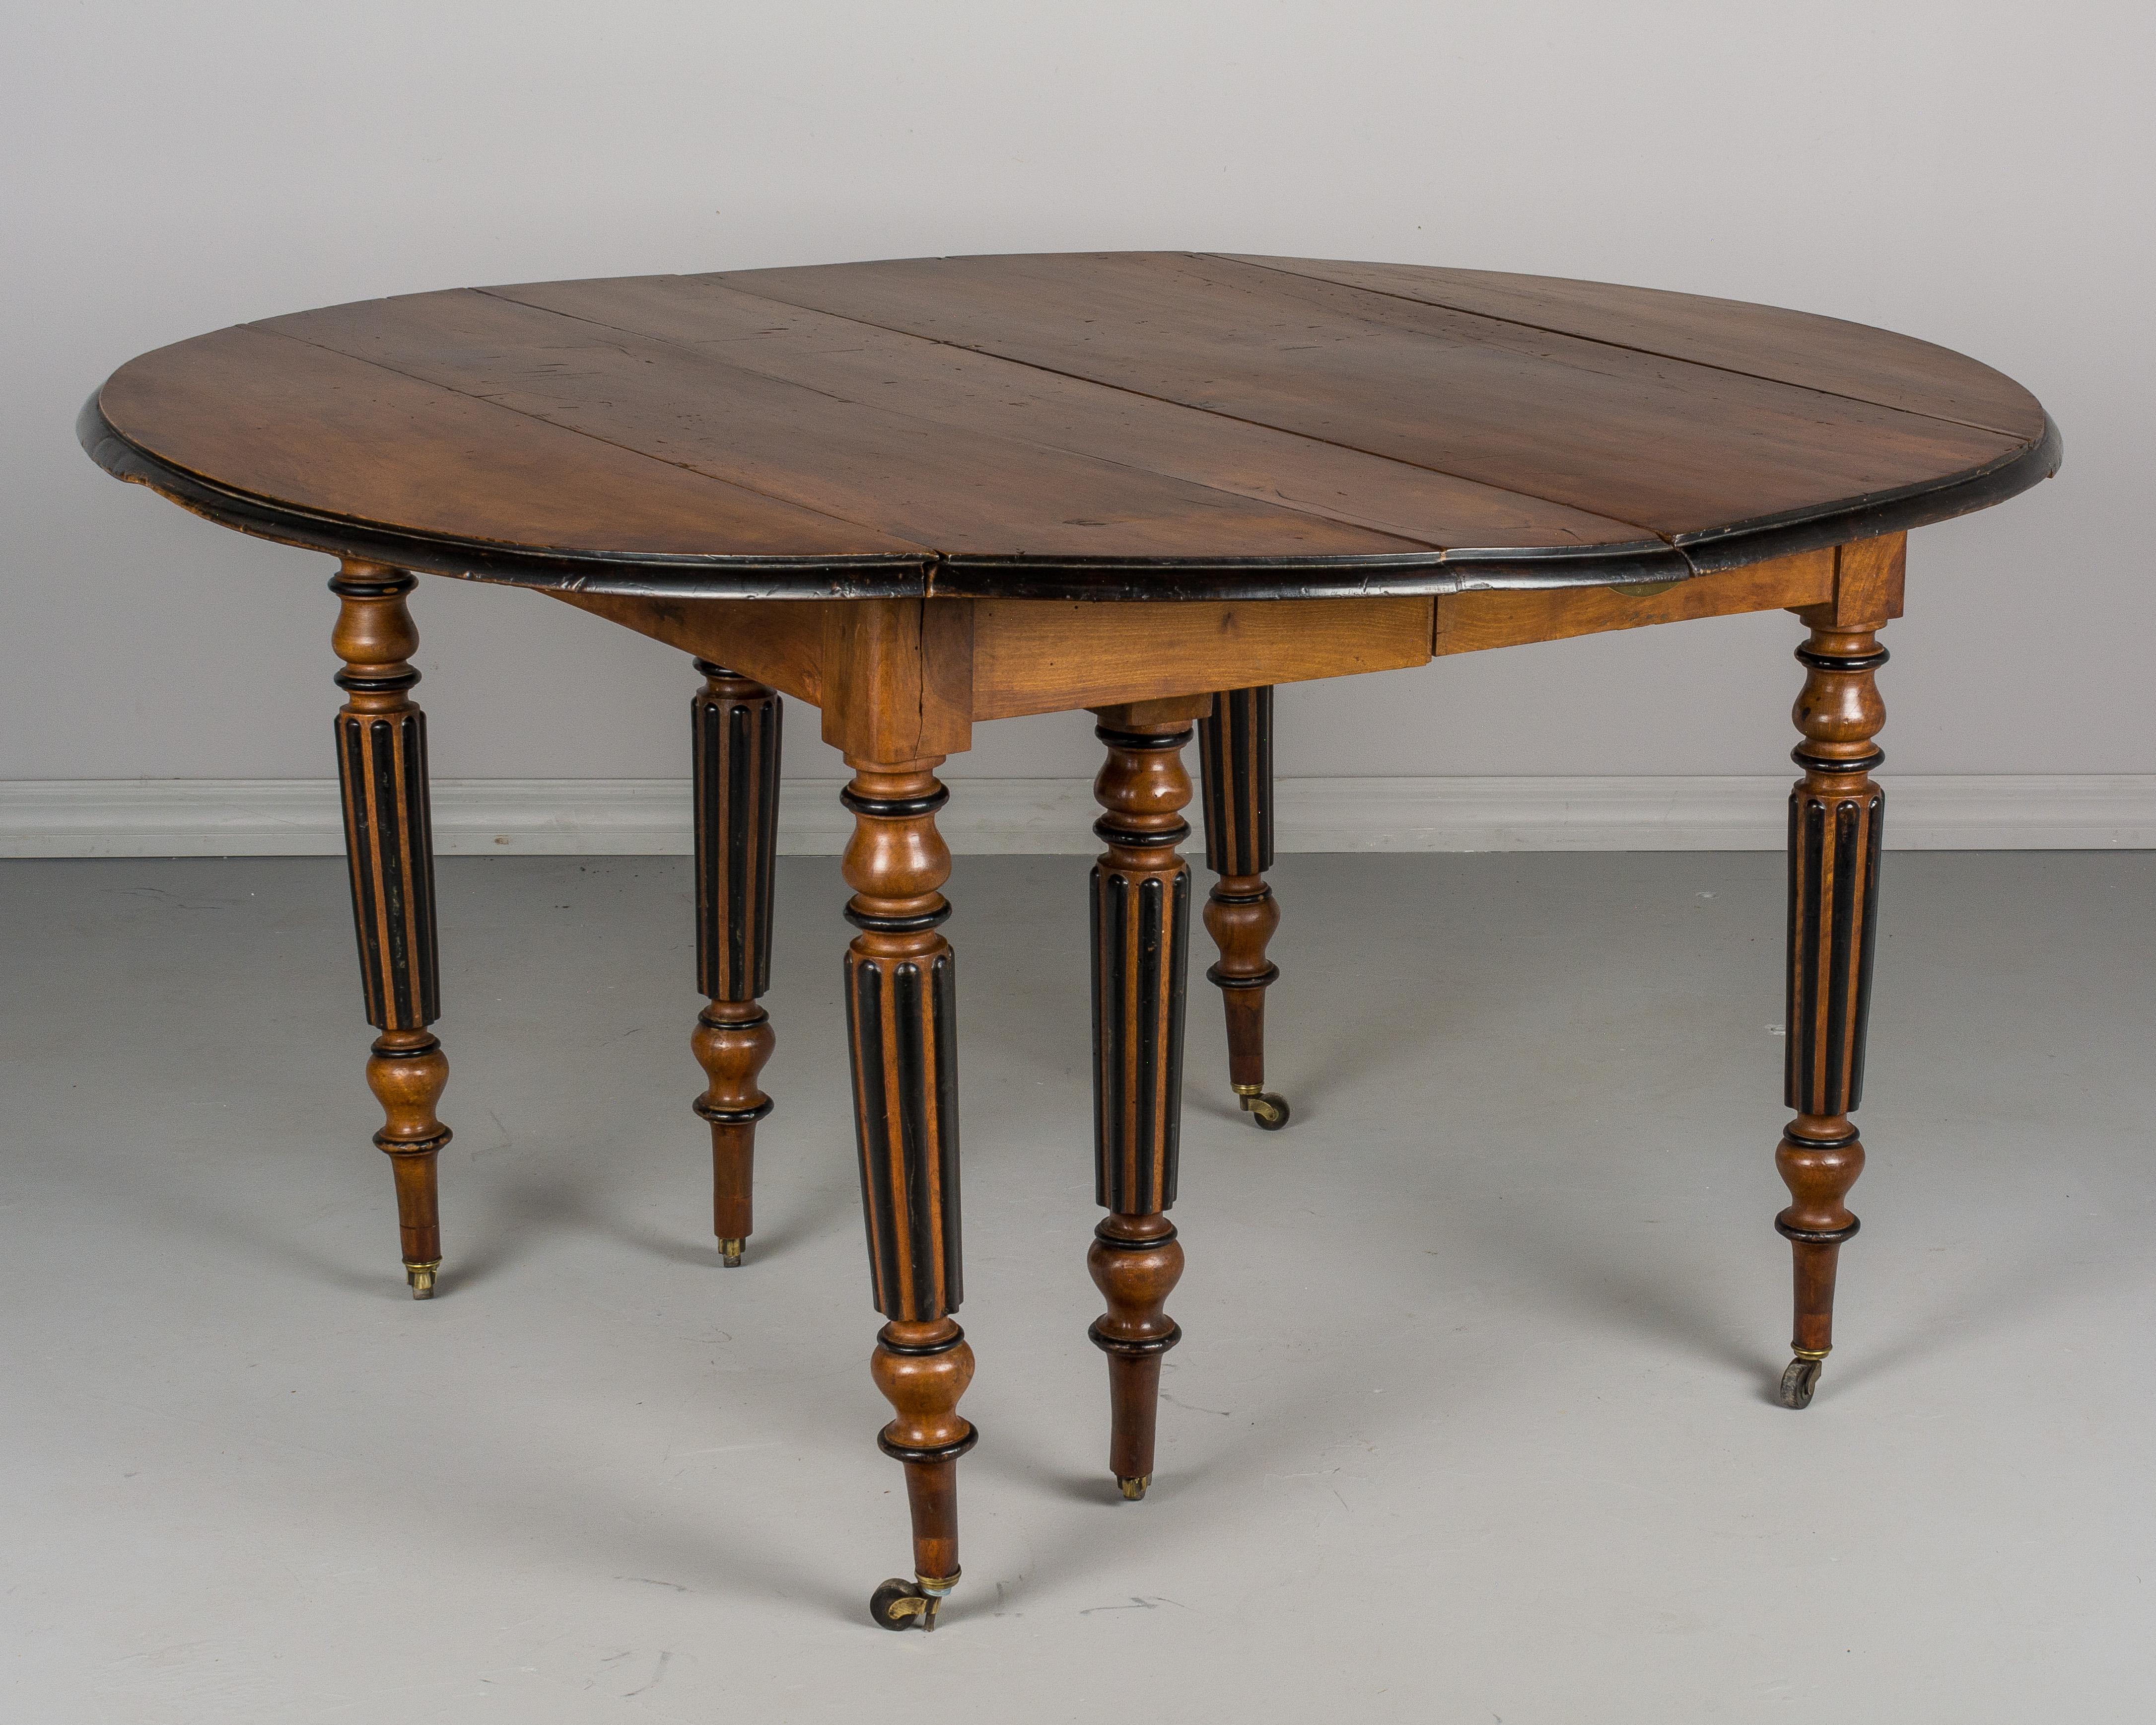 A 19th century French Napoleon III style drop leaf extension dining table made of solid walnut accented with black lacquer trim. Six fluted legs with brass castors. Table opens freely and has been raised to 29.5